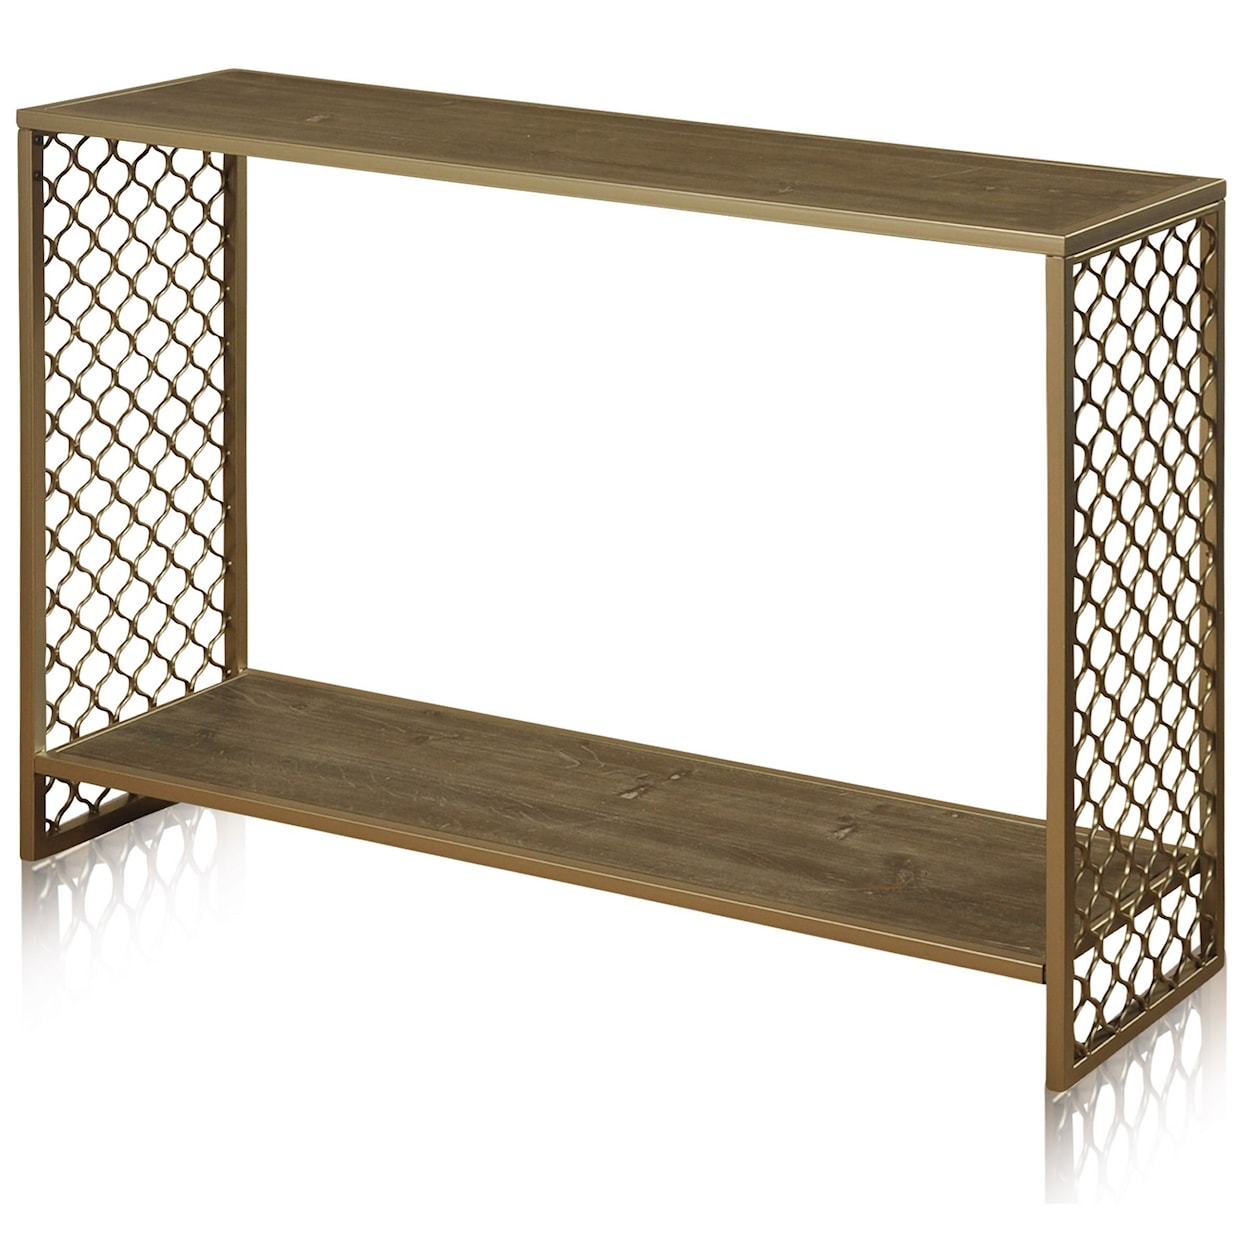 StyleCraft Occasional Tables Wrought Iron Console Table